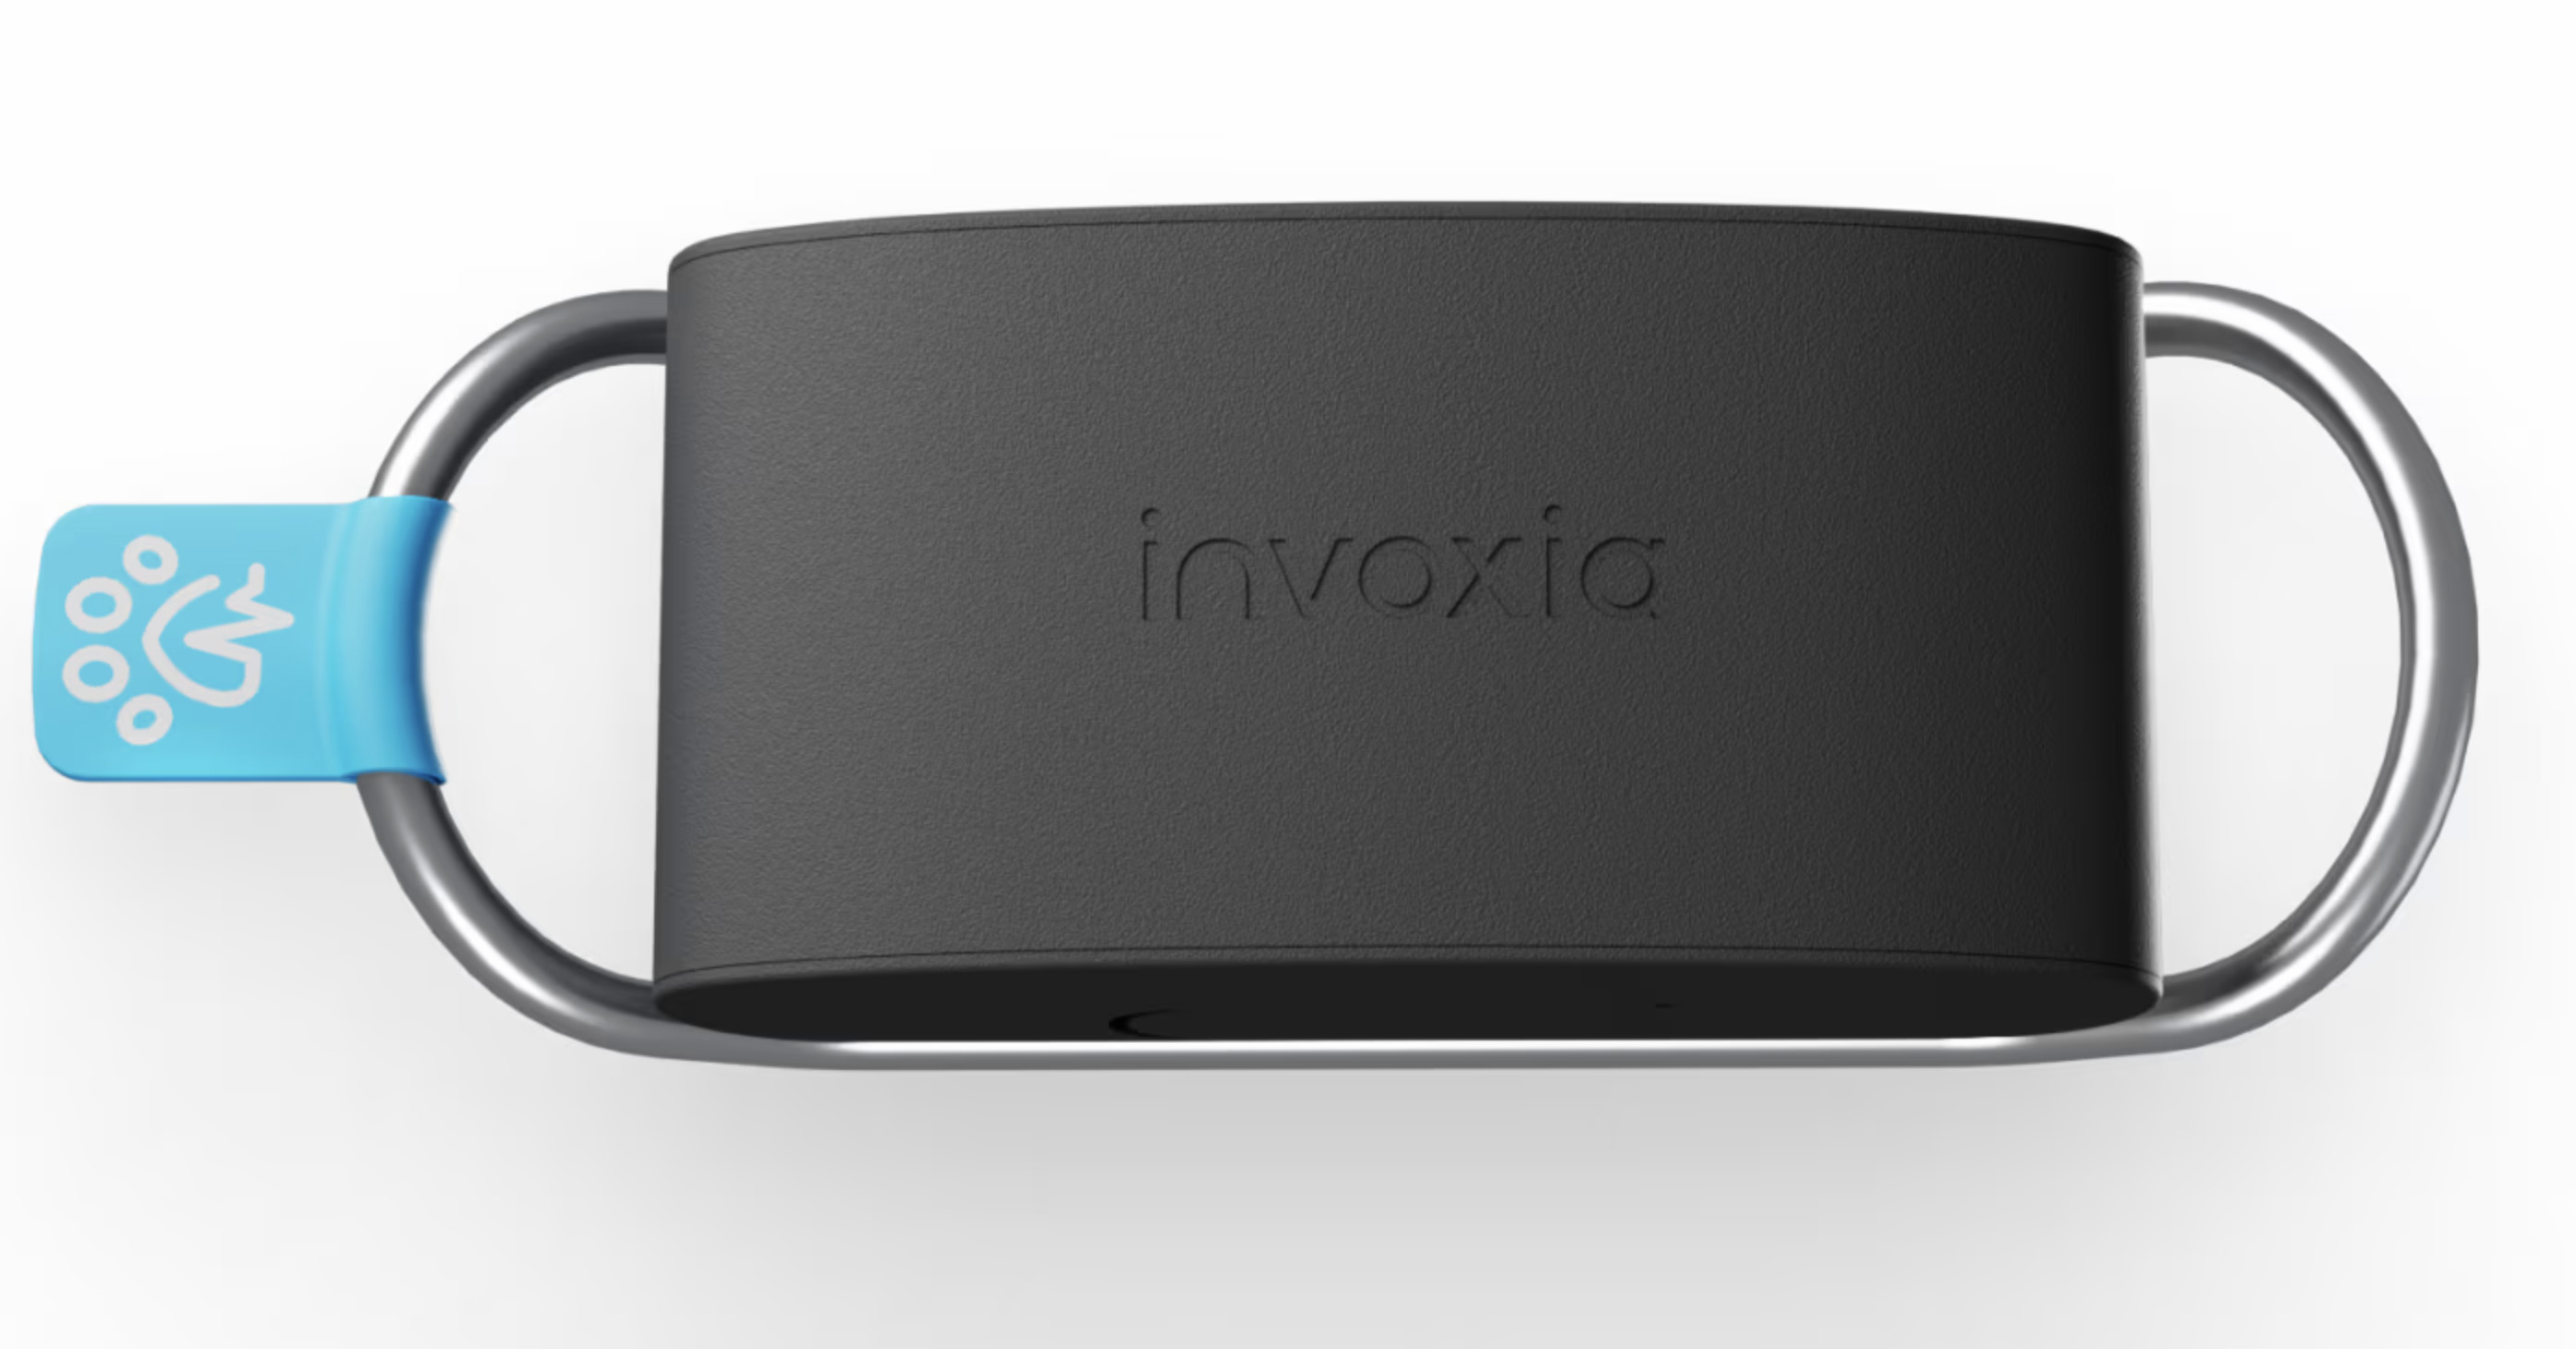 Invoxia Launches Minitailz, An AI Wearable That Monitors Your Pet's Health  - IMBOLDN